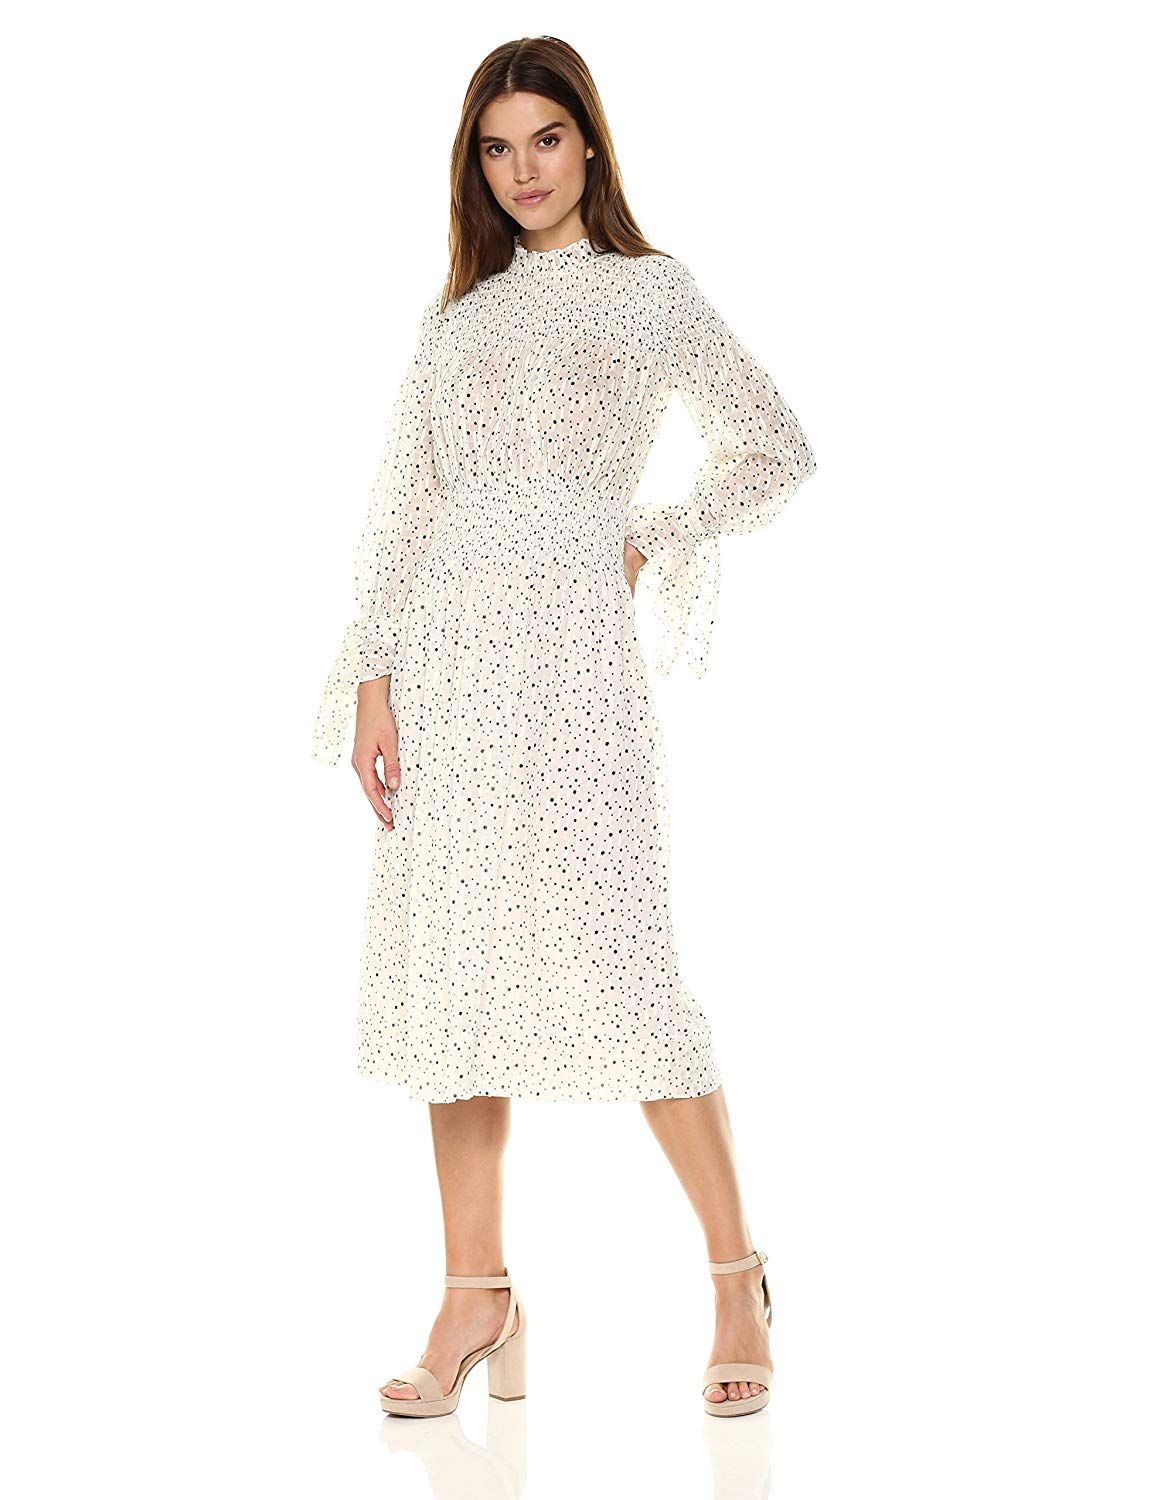 13 amazon dresses to get your hands on this fall